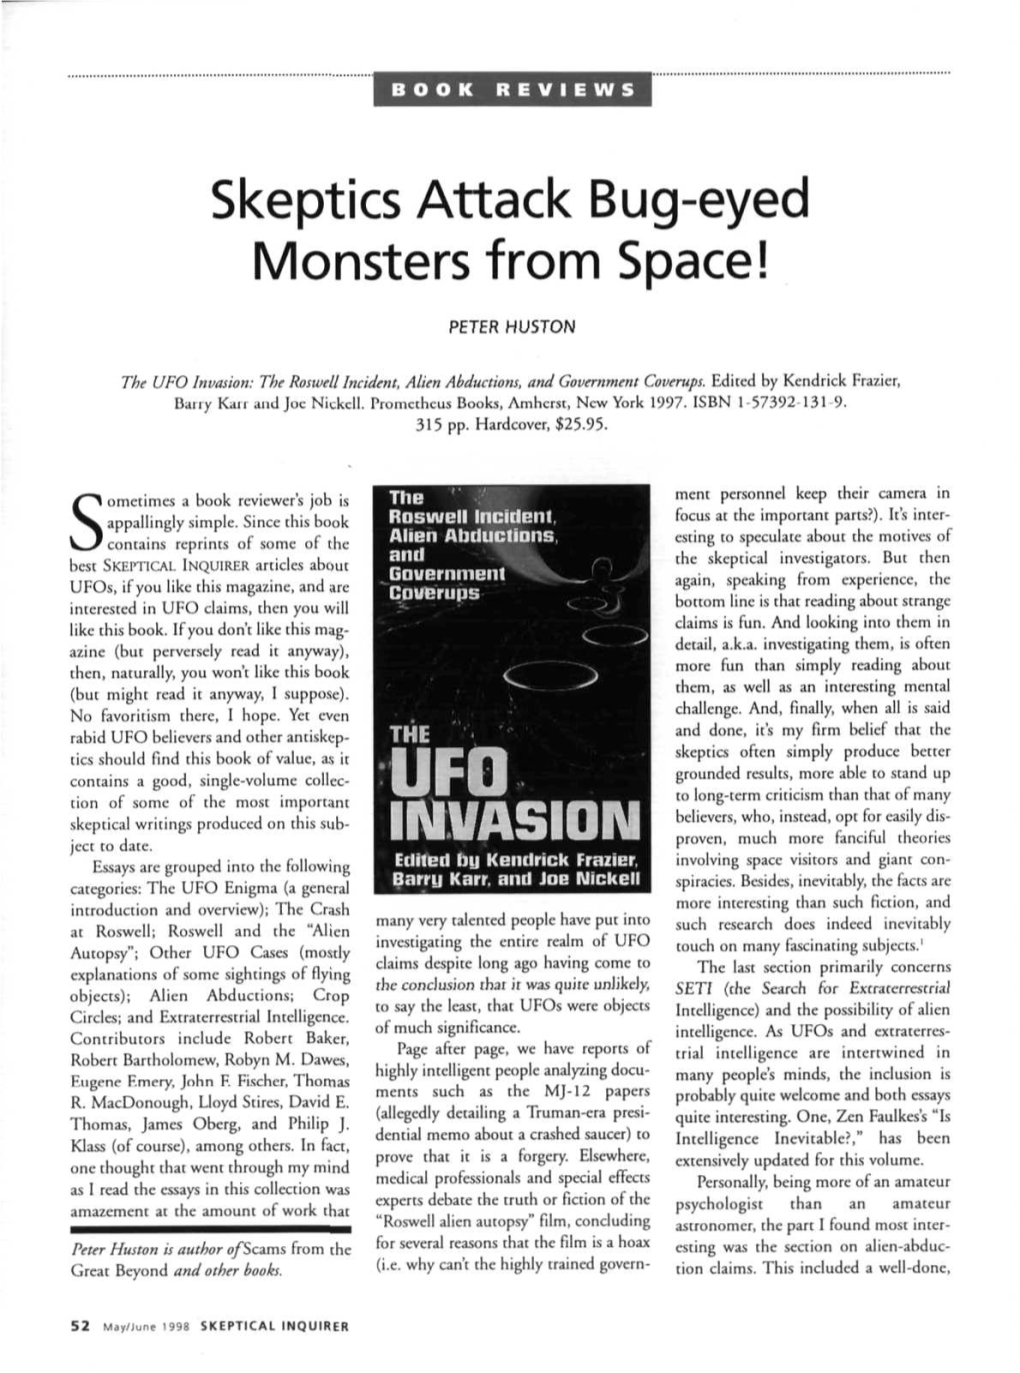 Skeptics Attack Bug-Eyed Monsters from Space!